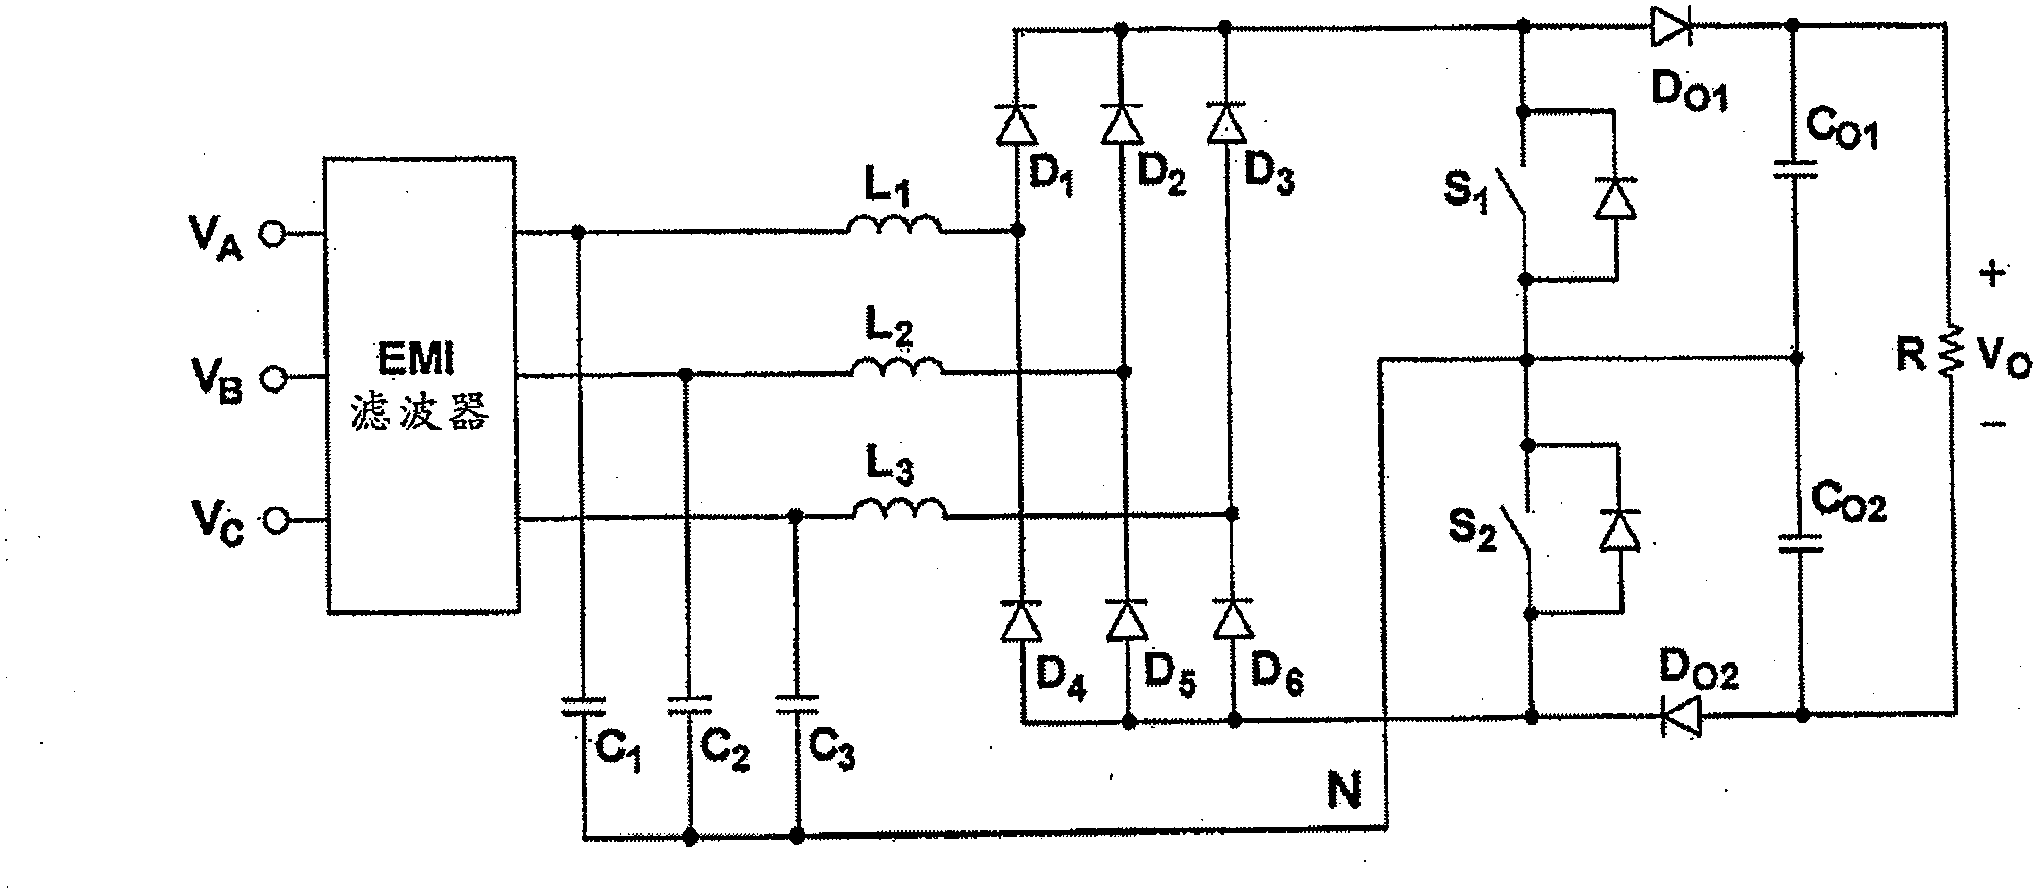 Three-phase soft-switched PCF rectifiers